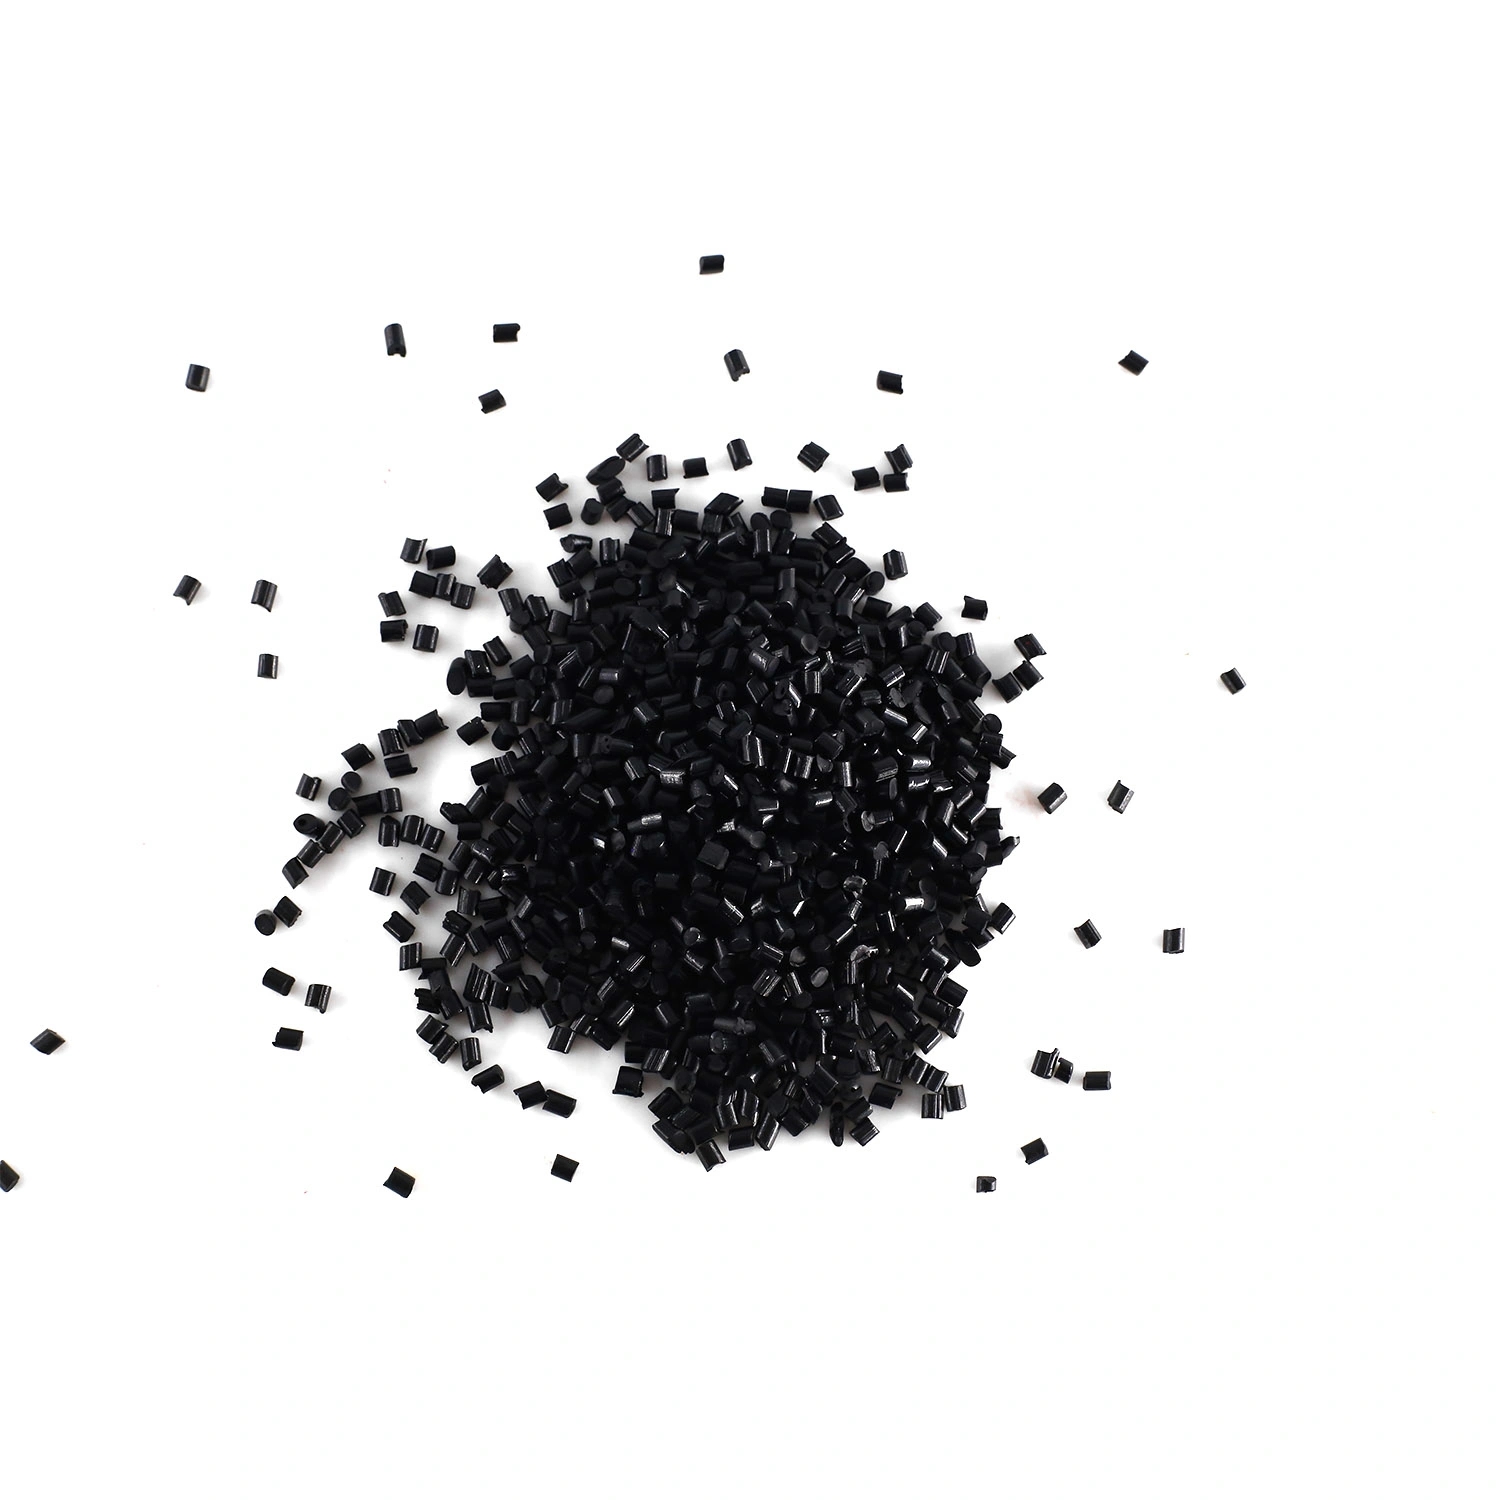 PP-PE-Carbon-Black-Masterbatch-Chemical-Raw-Material-Master-Batch-for-Mulch-Film-Plastic.webp